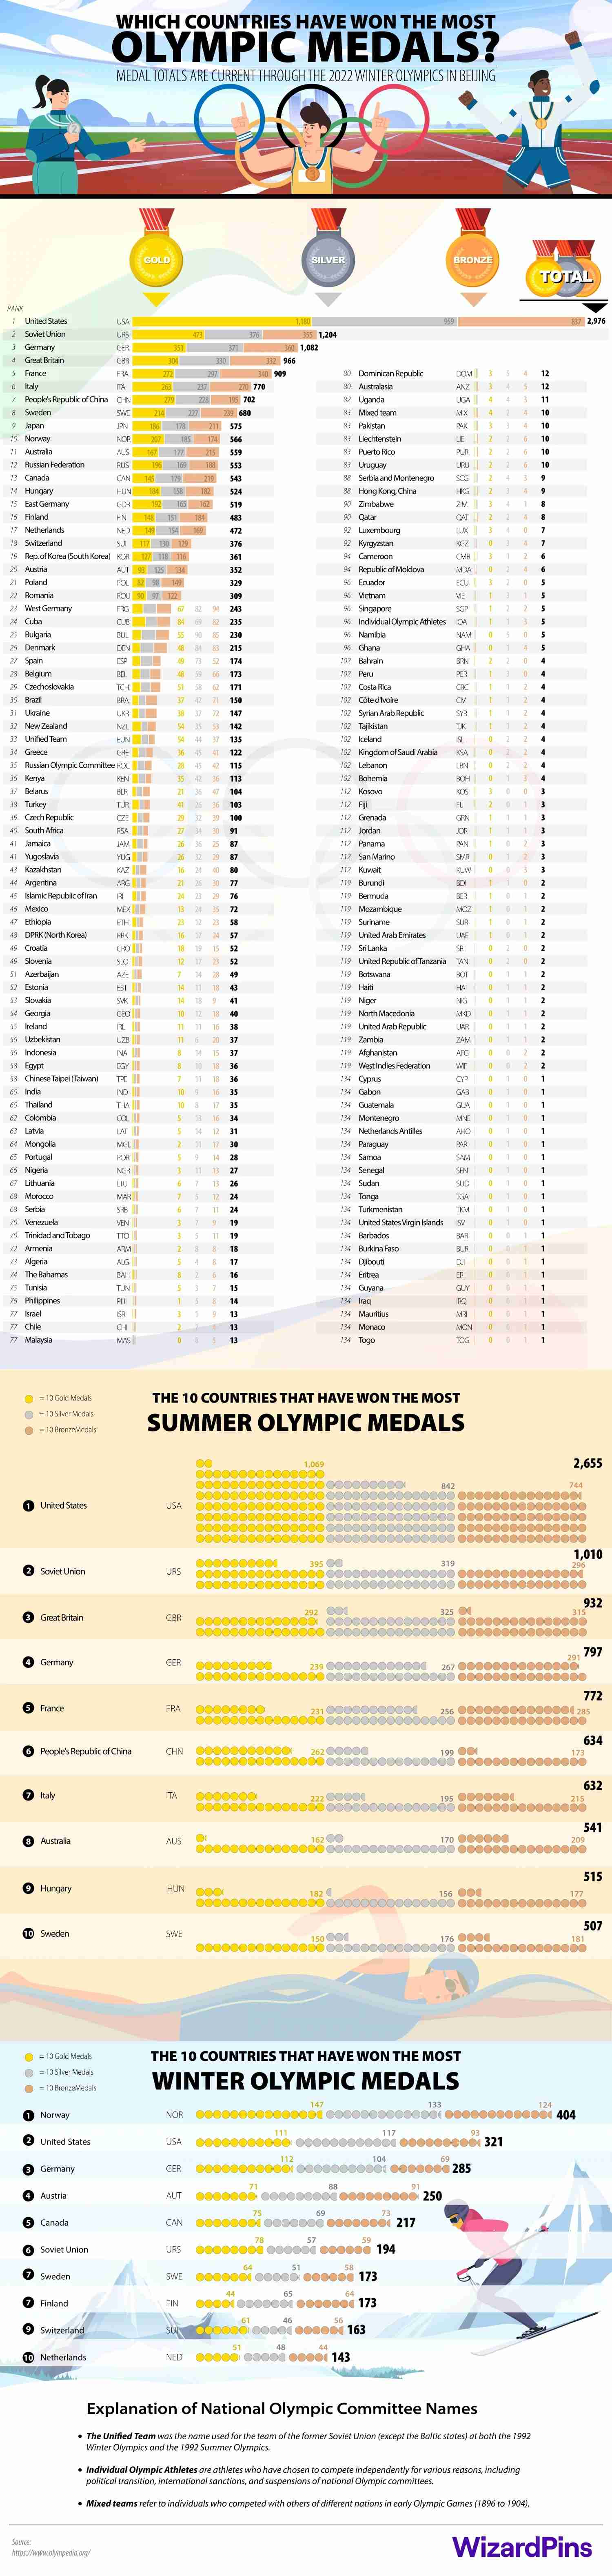 Which Countries Have Won the Most Olympic Medals #Sports #Olympic Medals